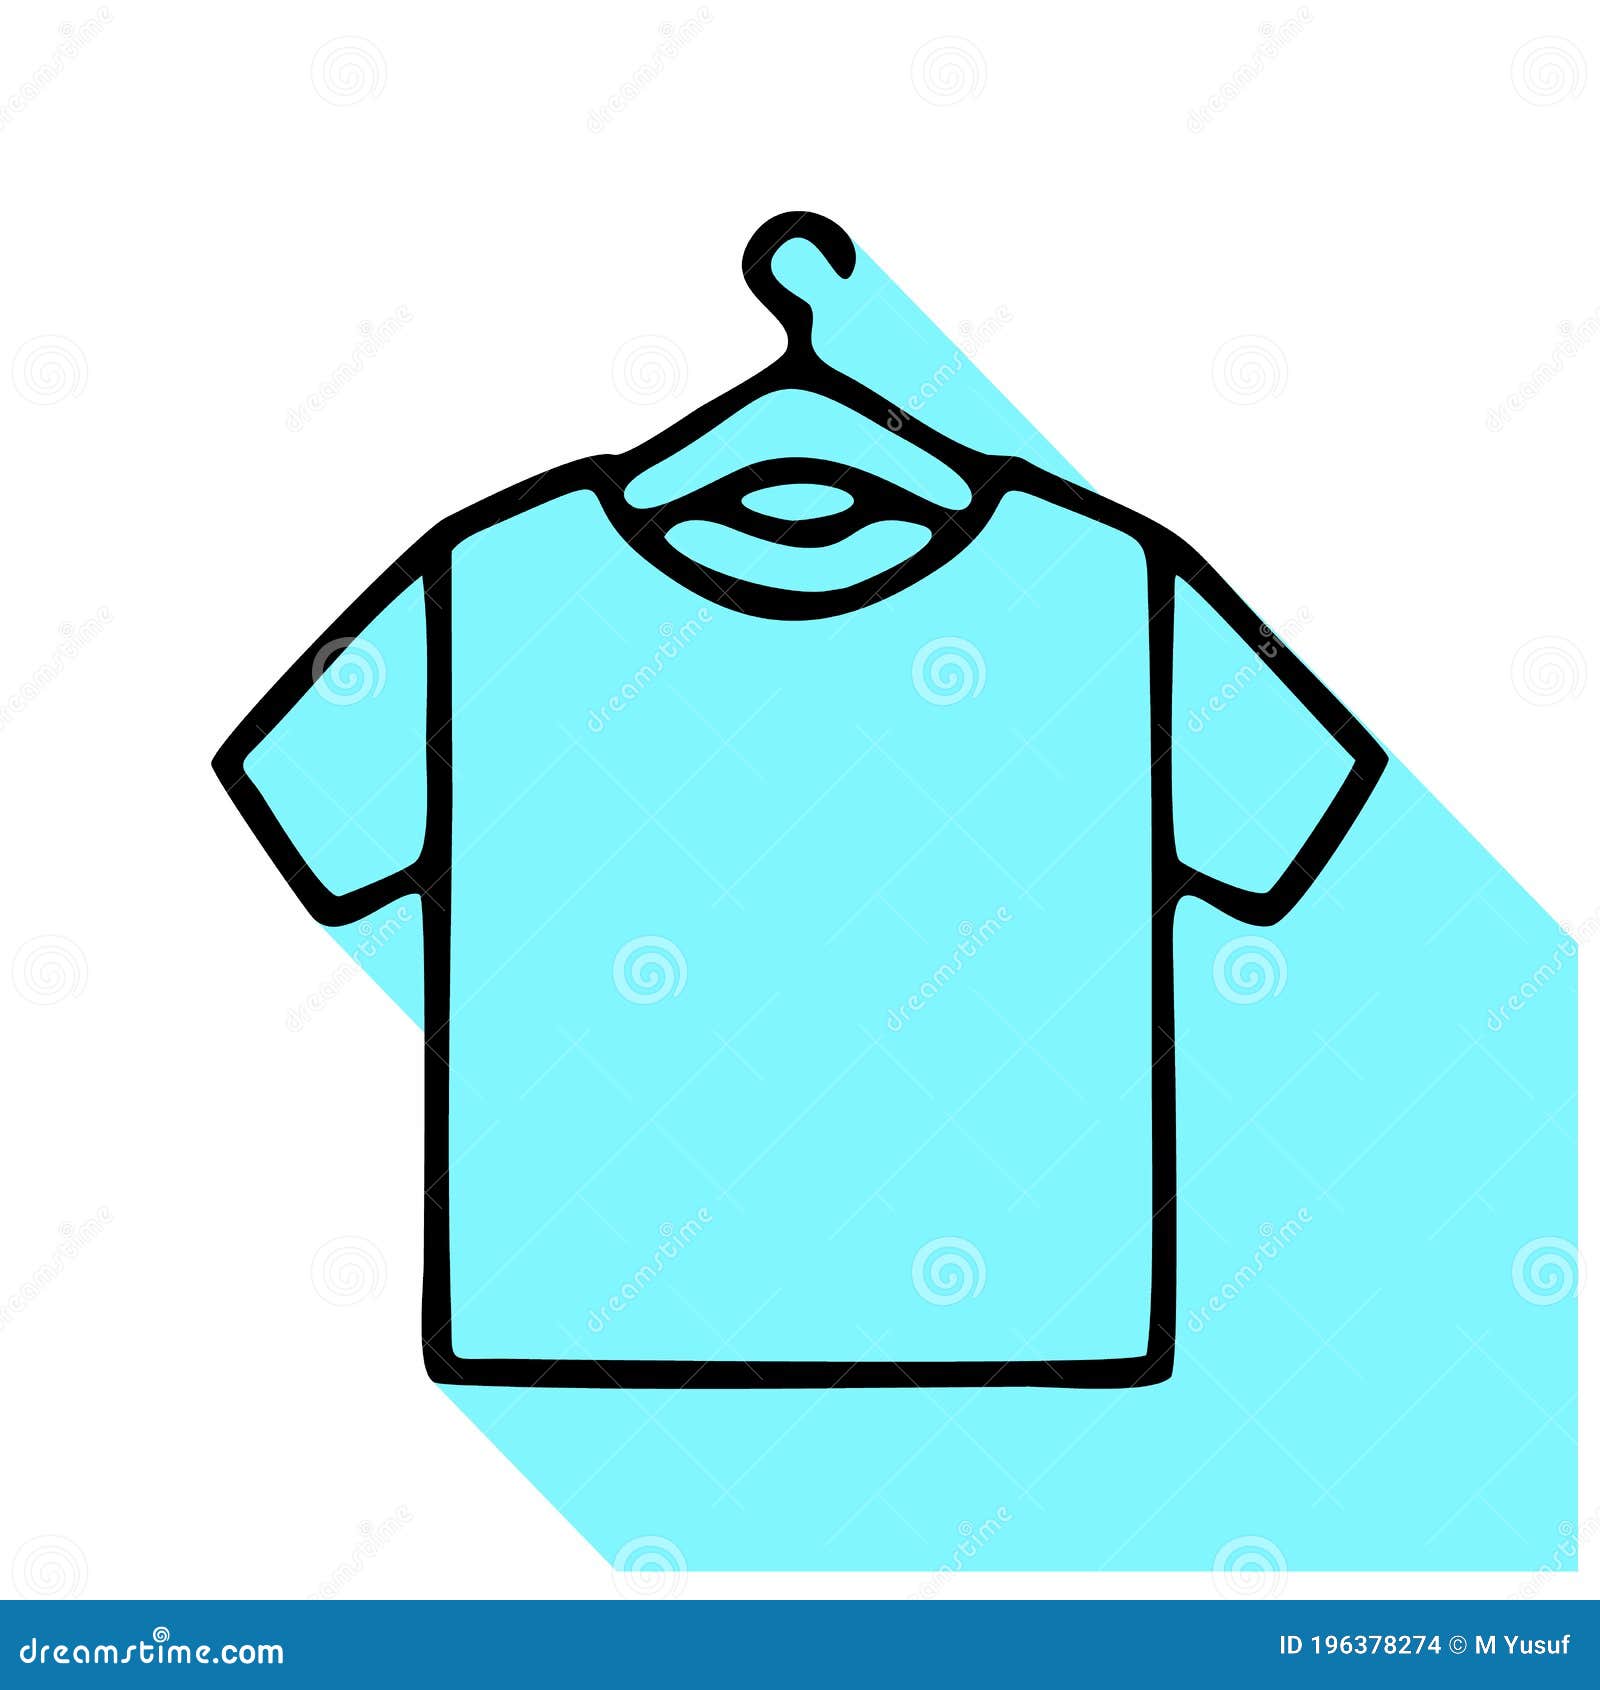 https://thumbs.dreamstime.com/z/t-shirt-hanger-icon-clothing-shop-line-logo-flat-sign-apparel-collection-logotype-laundry-clothes-cleaning-196378274.jpg